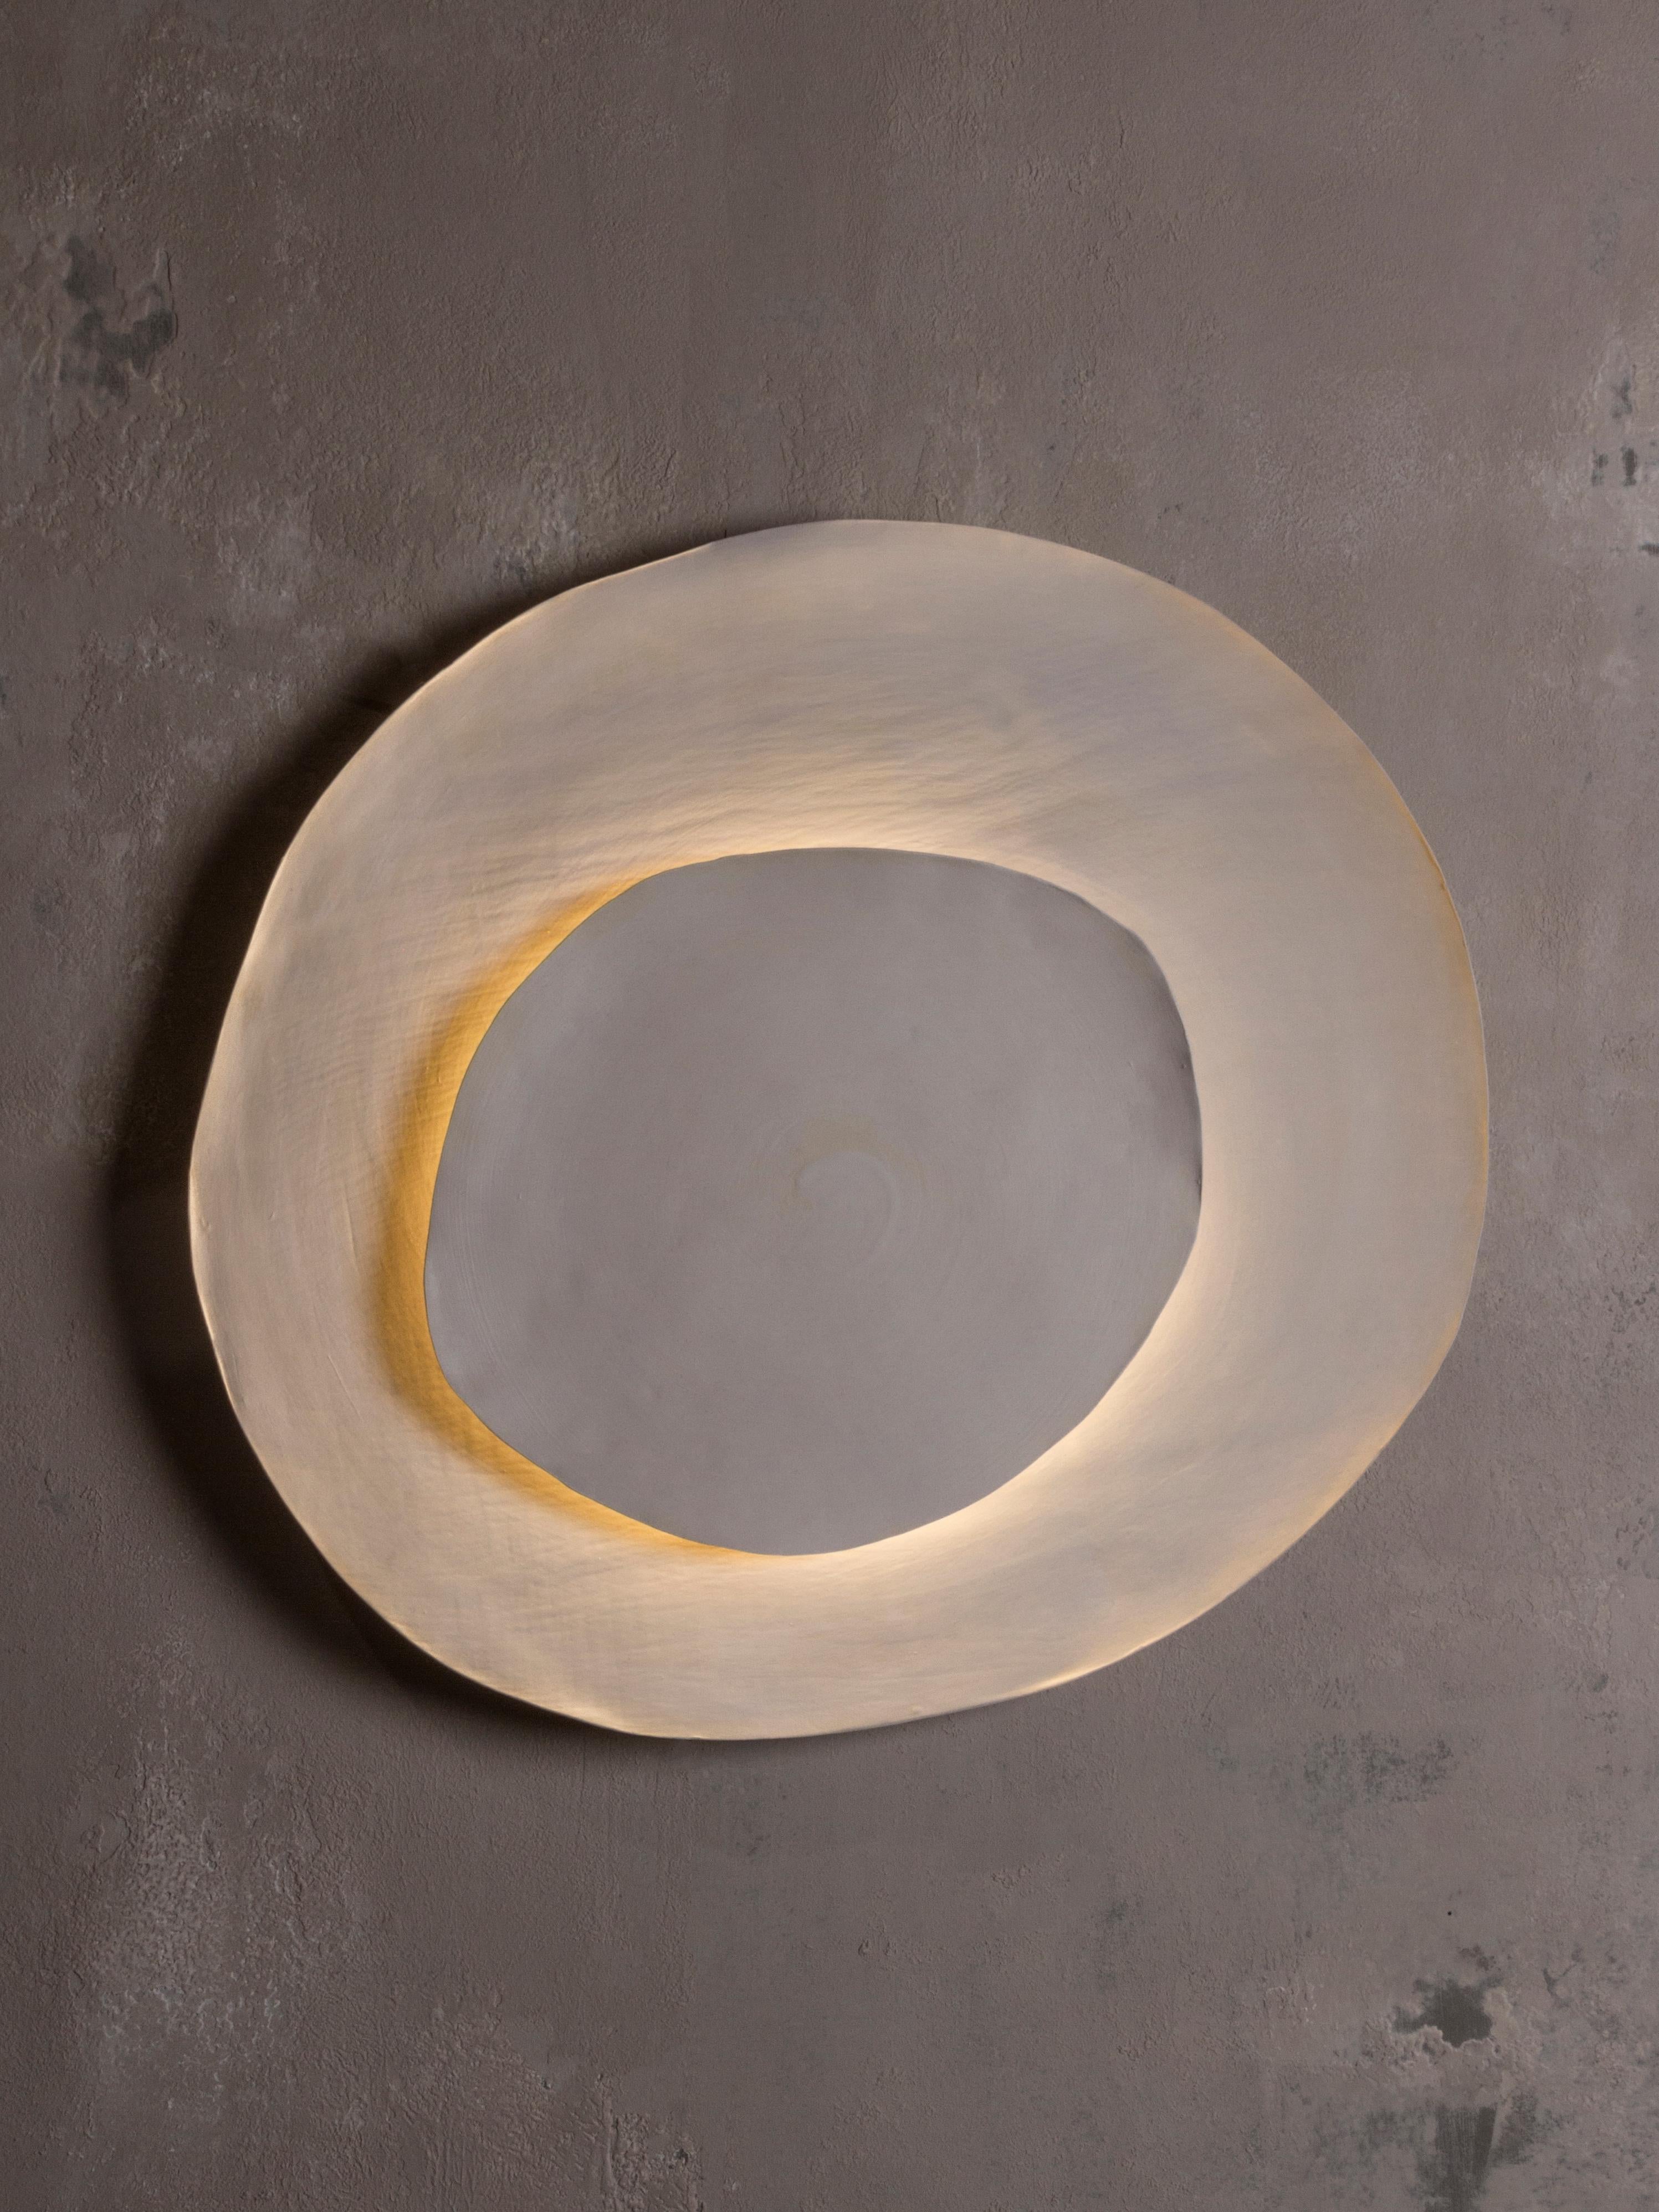 Silk #18 wall light by Margaux Leycuras
One of a Kind. Signed and numbered.
Dimensions: Ø 51 x H 56 cm.
Material: Ceramic, sandy stoneware platters with a porcelain slip finish.
The piece is signed, numbered and delivered with a certificate of